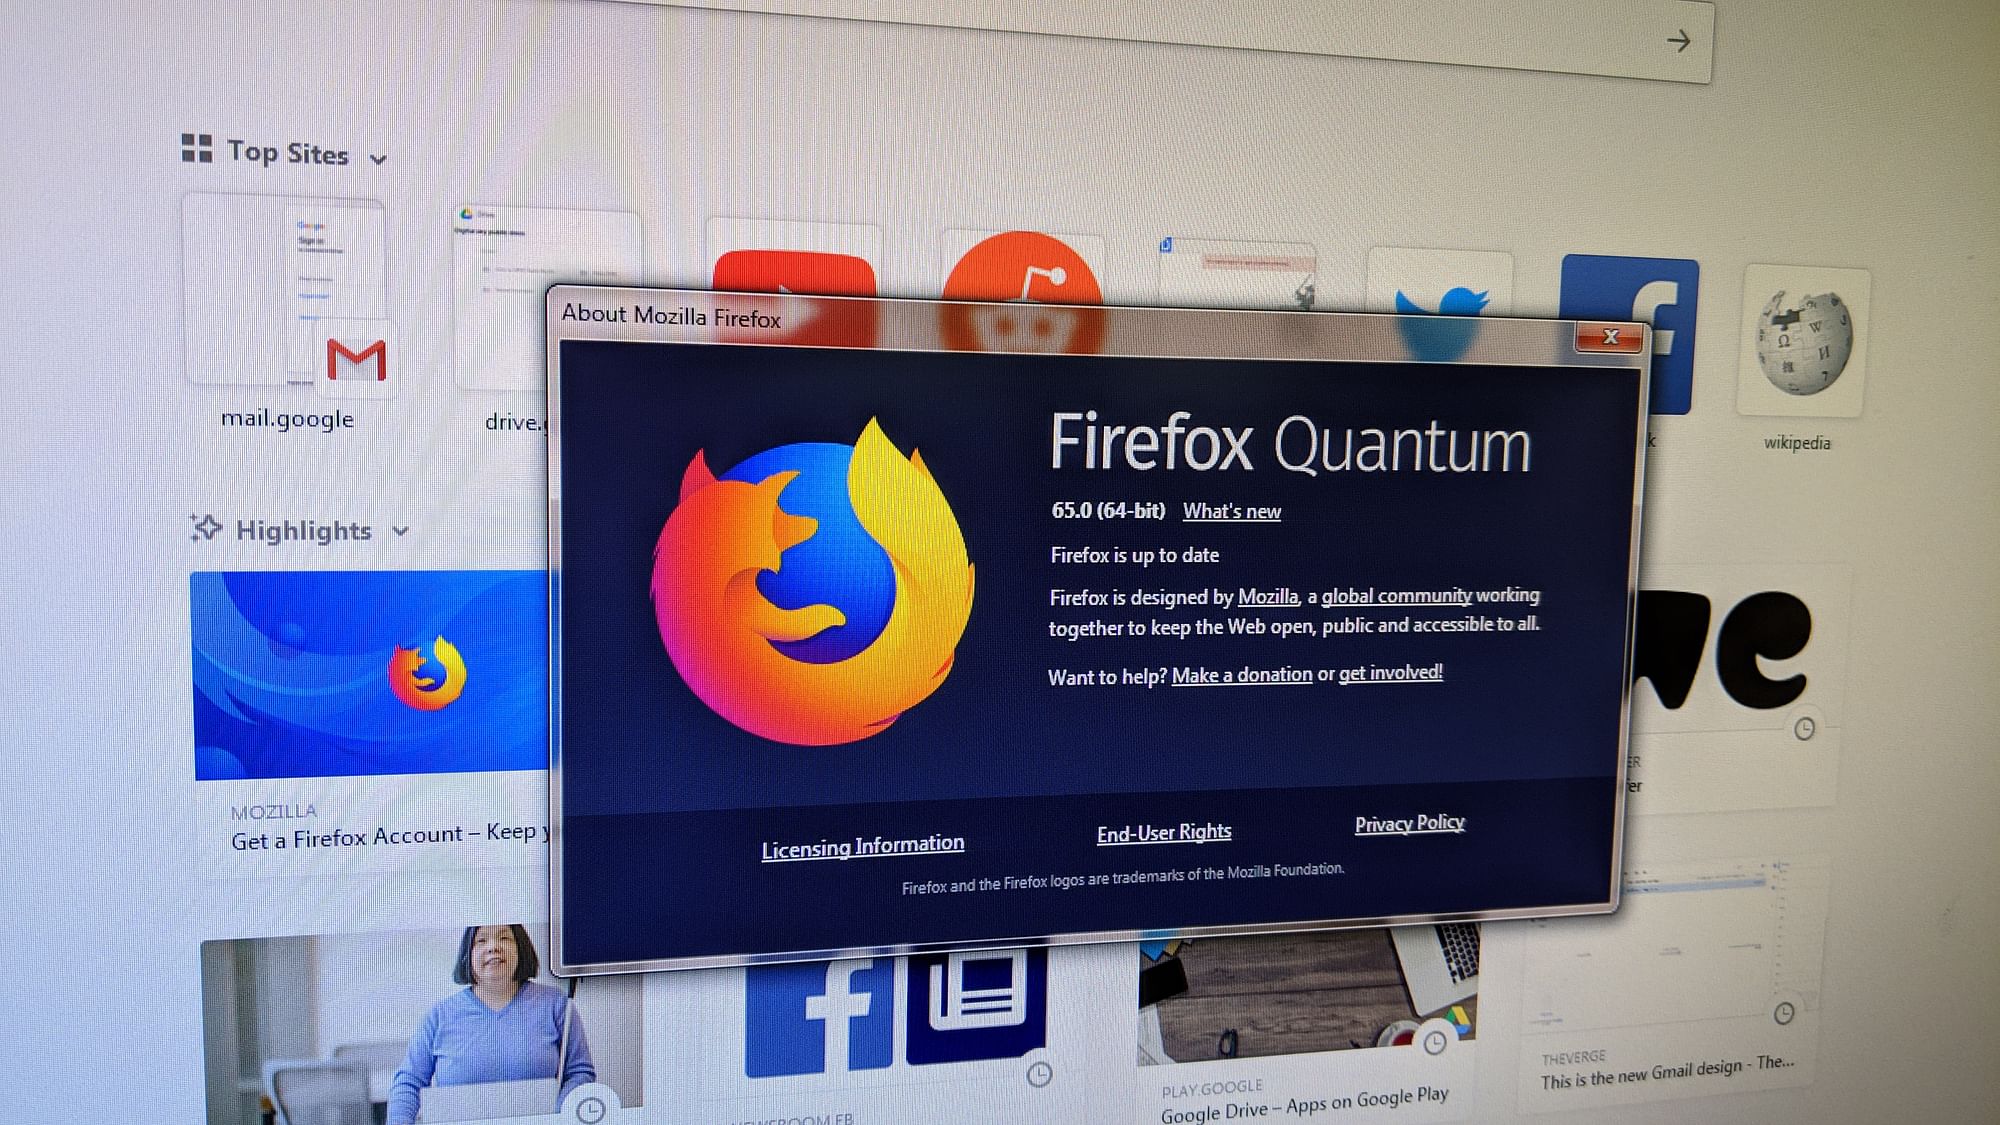 Firefox users weren’t able to update/install add-on extensions.